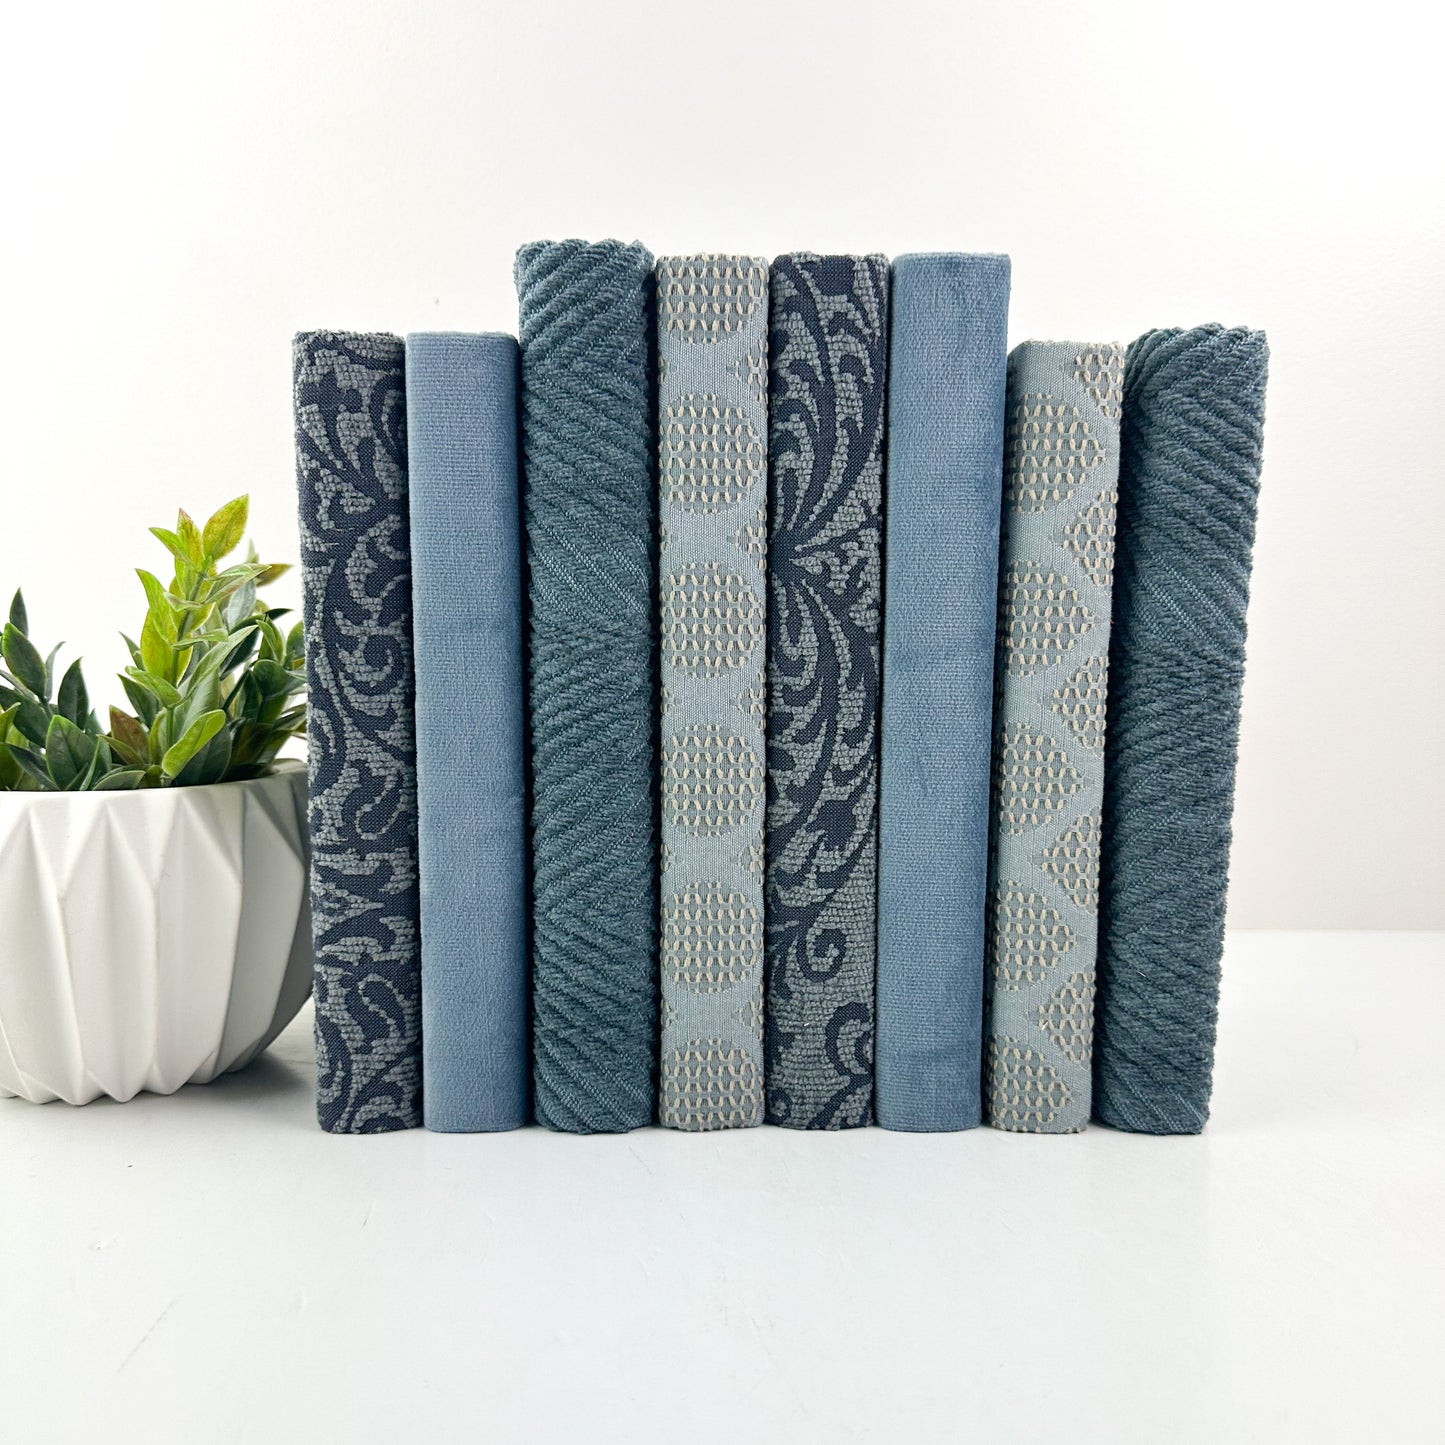 Blue Fabric Covered Book Set